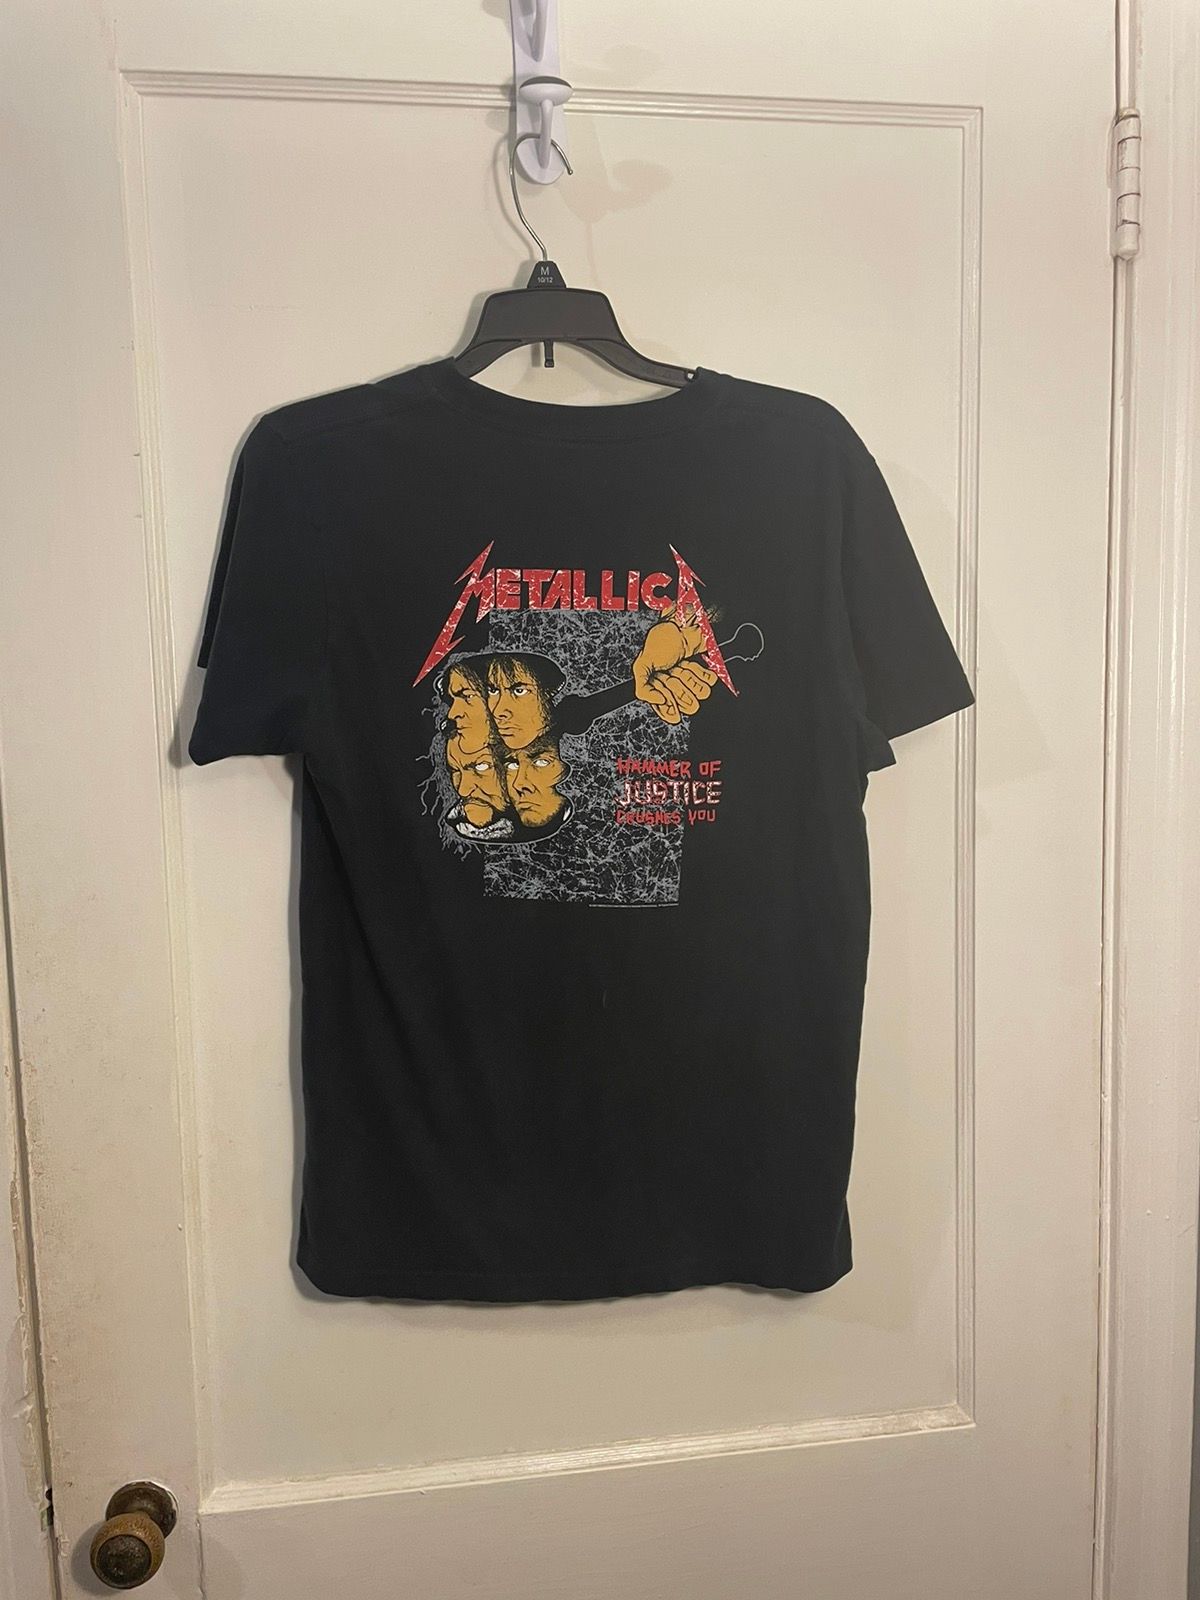 Vintage Men’s Small Black Metallica Graphic Band Tee Size US S / EU 44-46 / 1 - 2 Preview